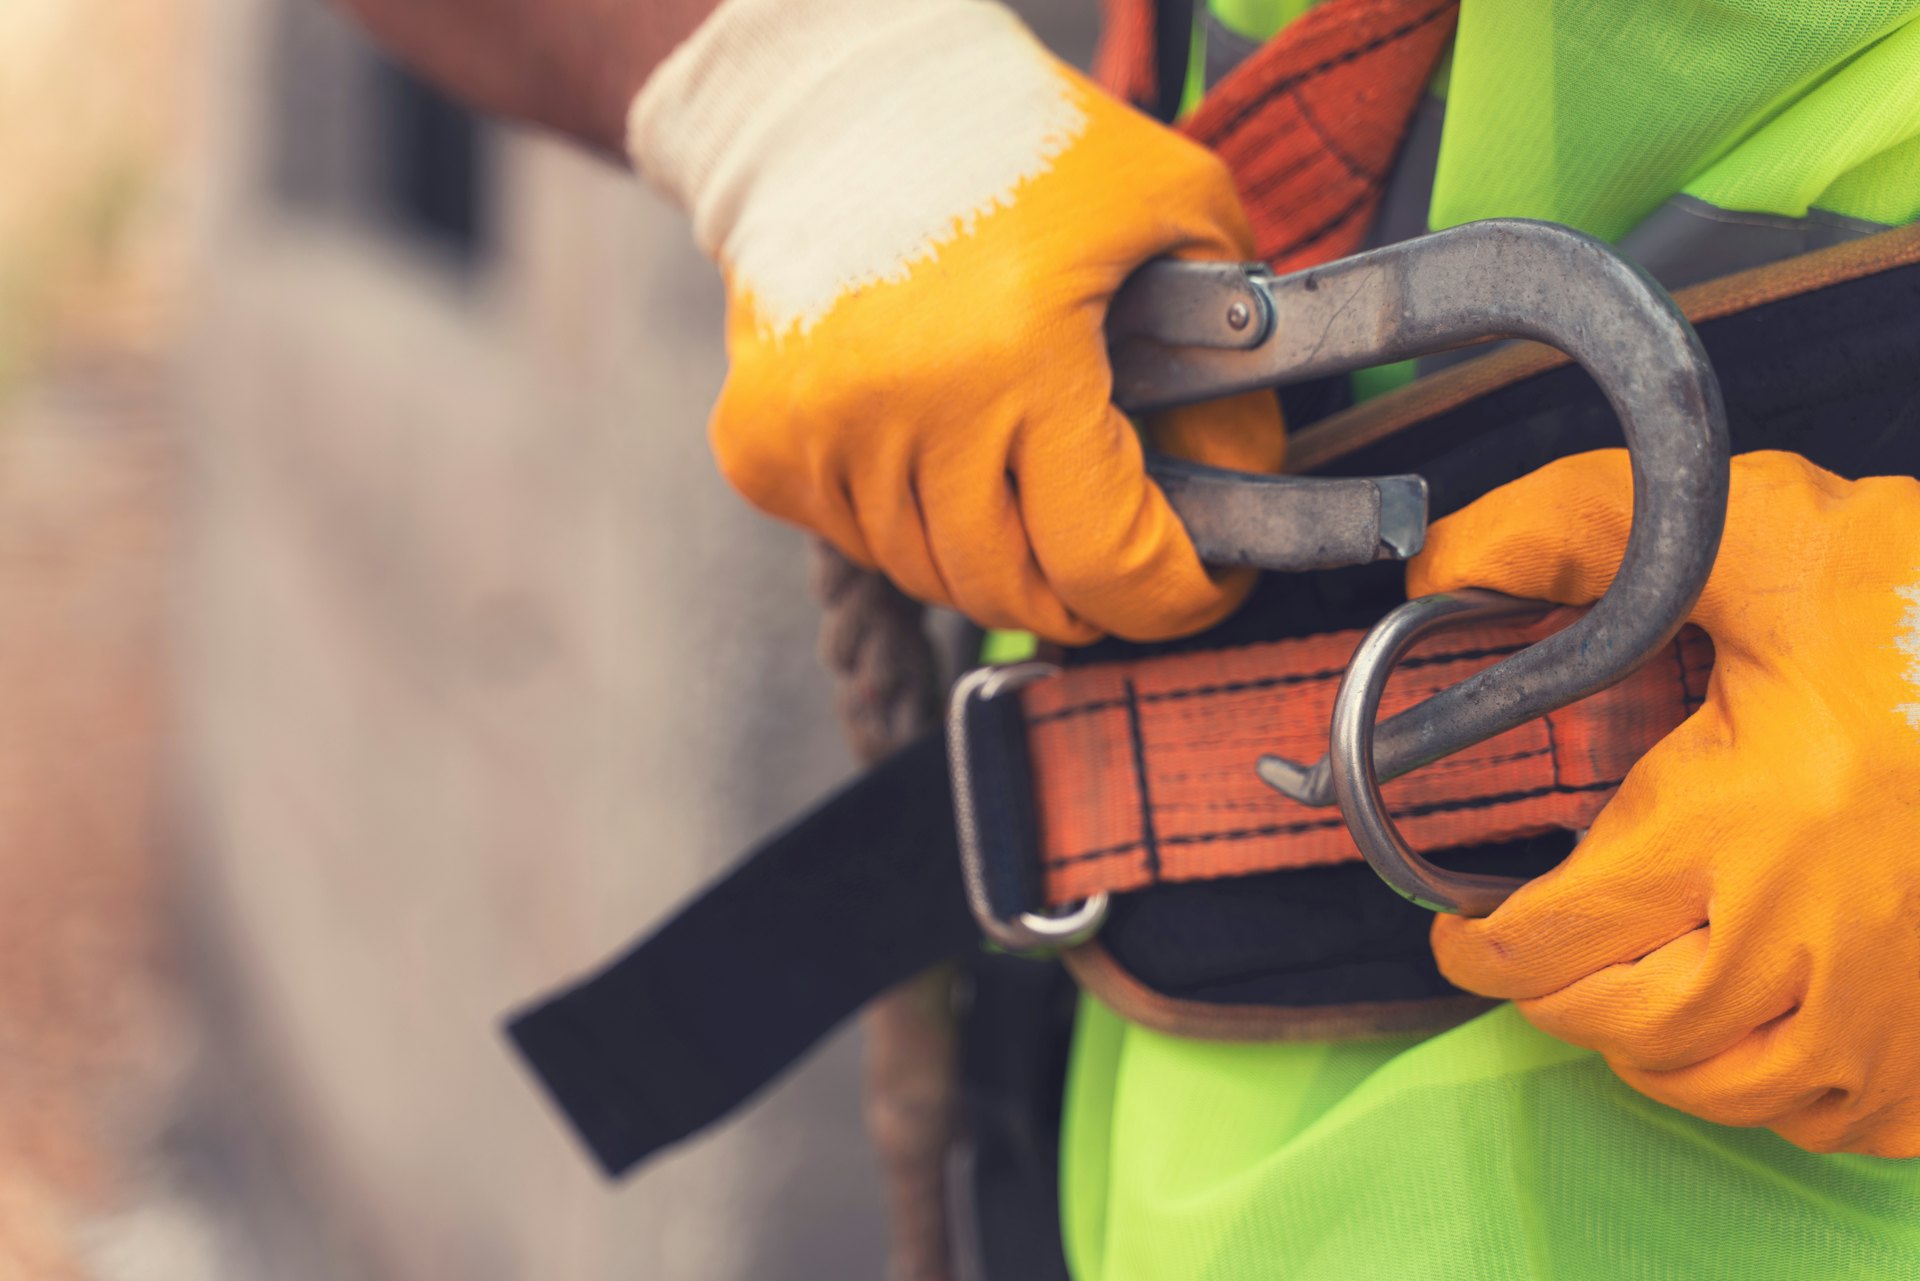 The Occupational Safety and Health Administration (OSHA) recently announced its preliminary list of the 10 most frequently cited safety violations from the 2022 fiscal year.